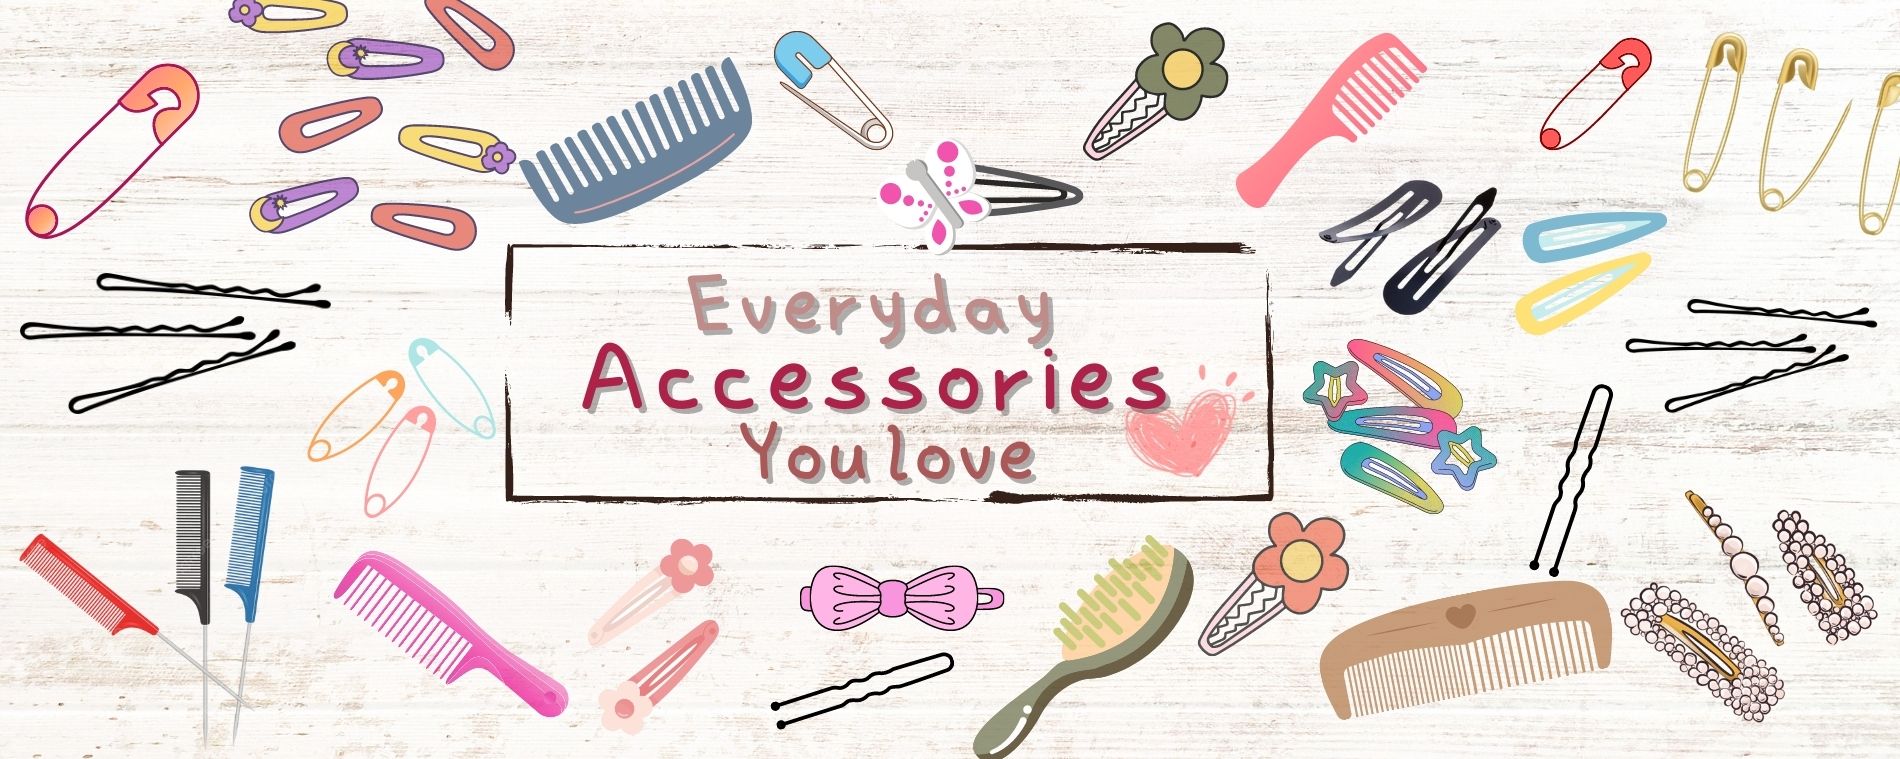 https://myhairaccessory.com/hair-accessories/tic-tac-clips-pins.html